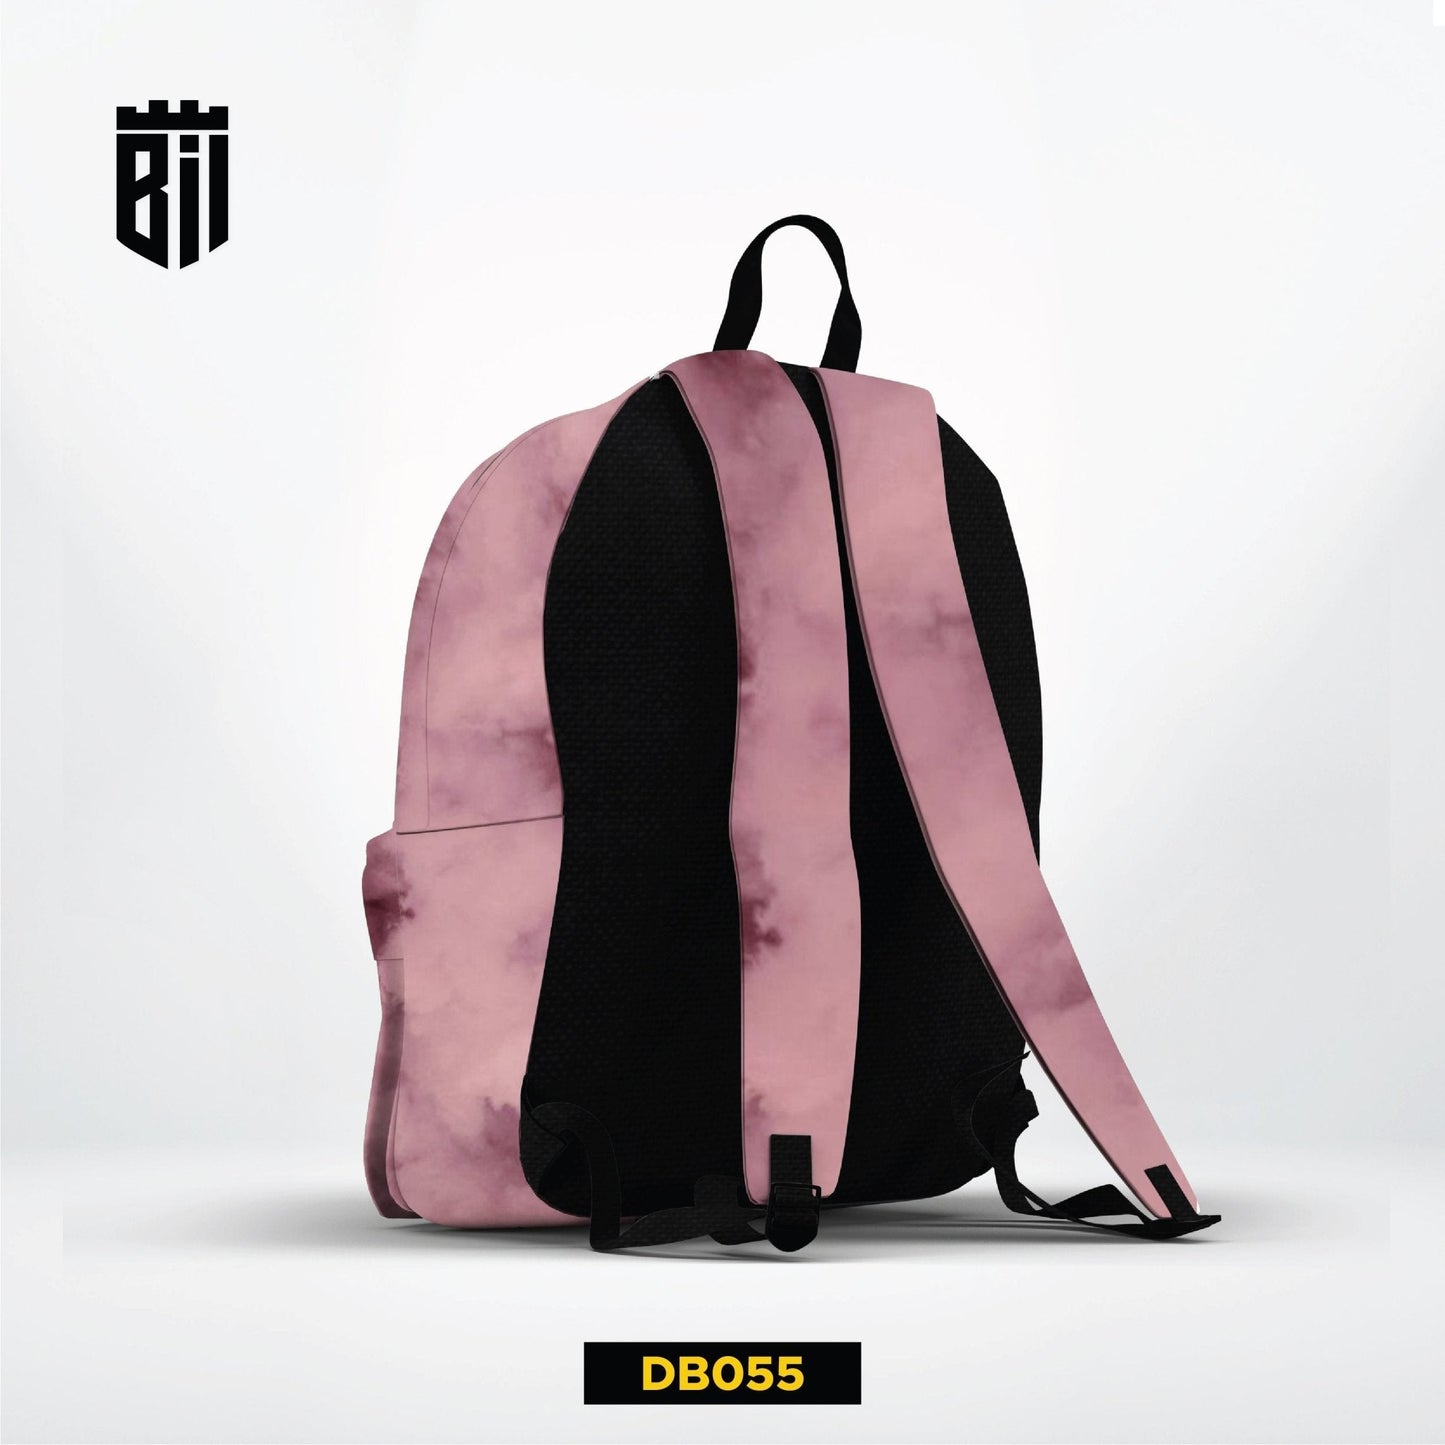 DB055 Pink Butterfly Allover Printed Backpack - BREACHIT